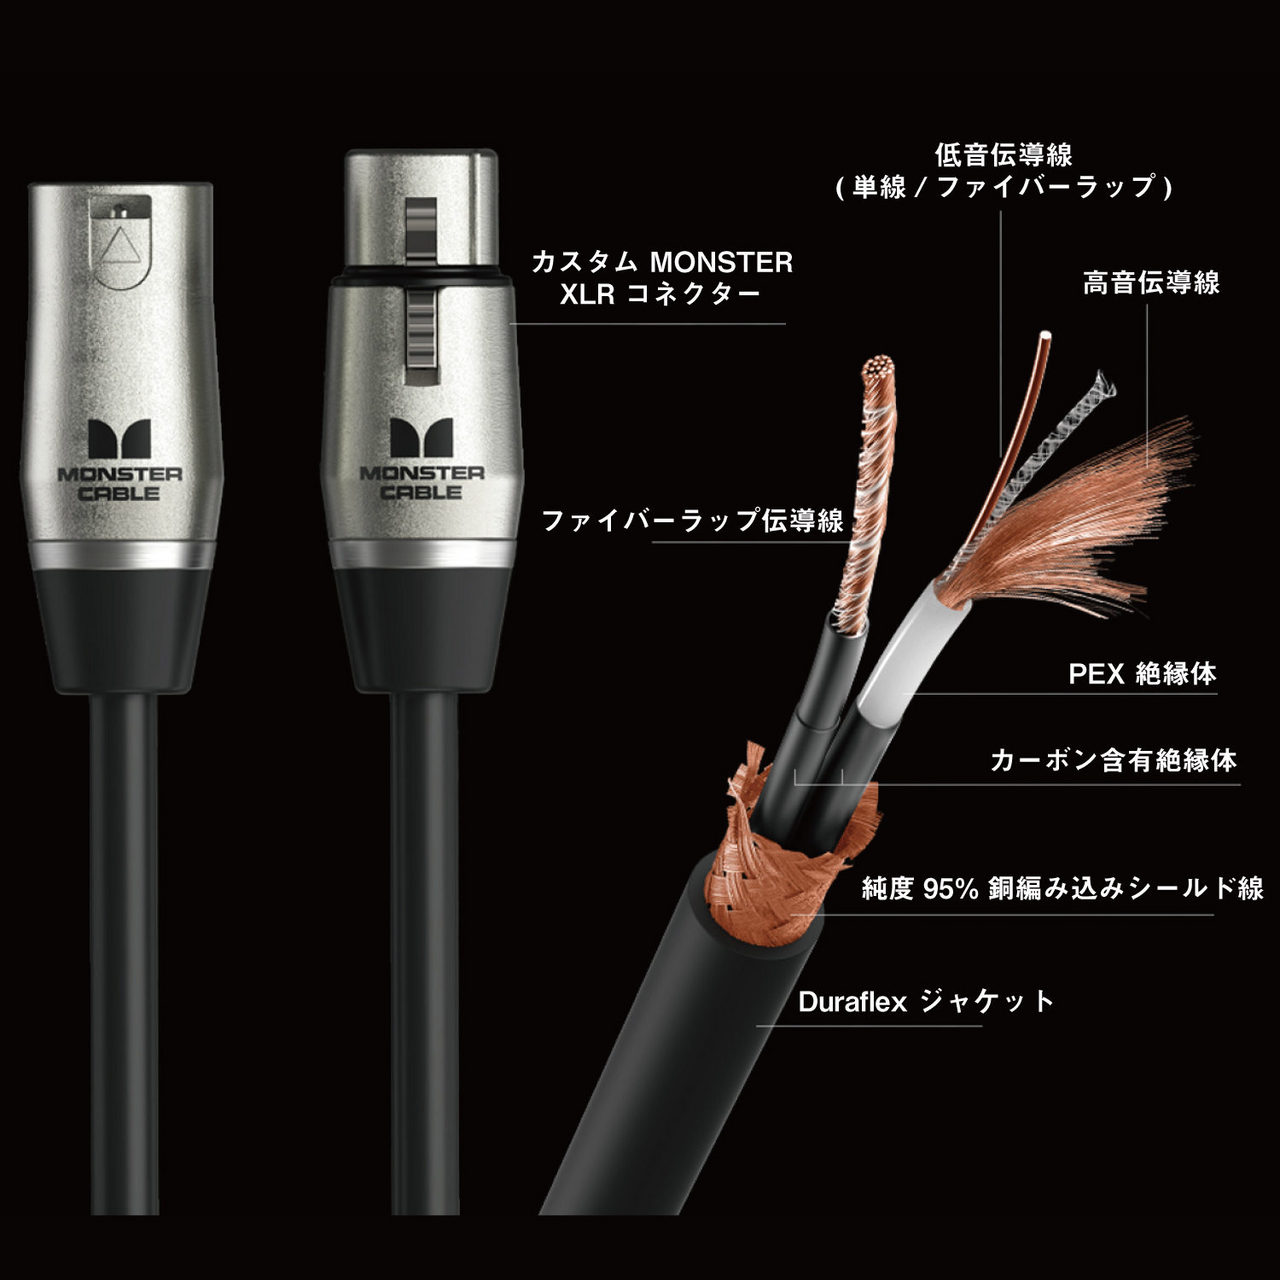 Monster Cable PERFORMER 600 MIC P600-M-20 マイクケーブル ...